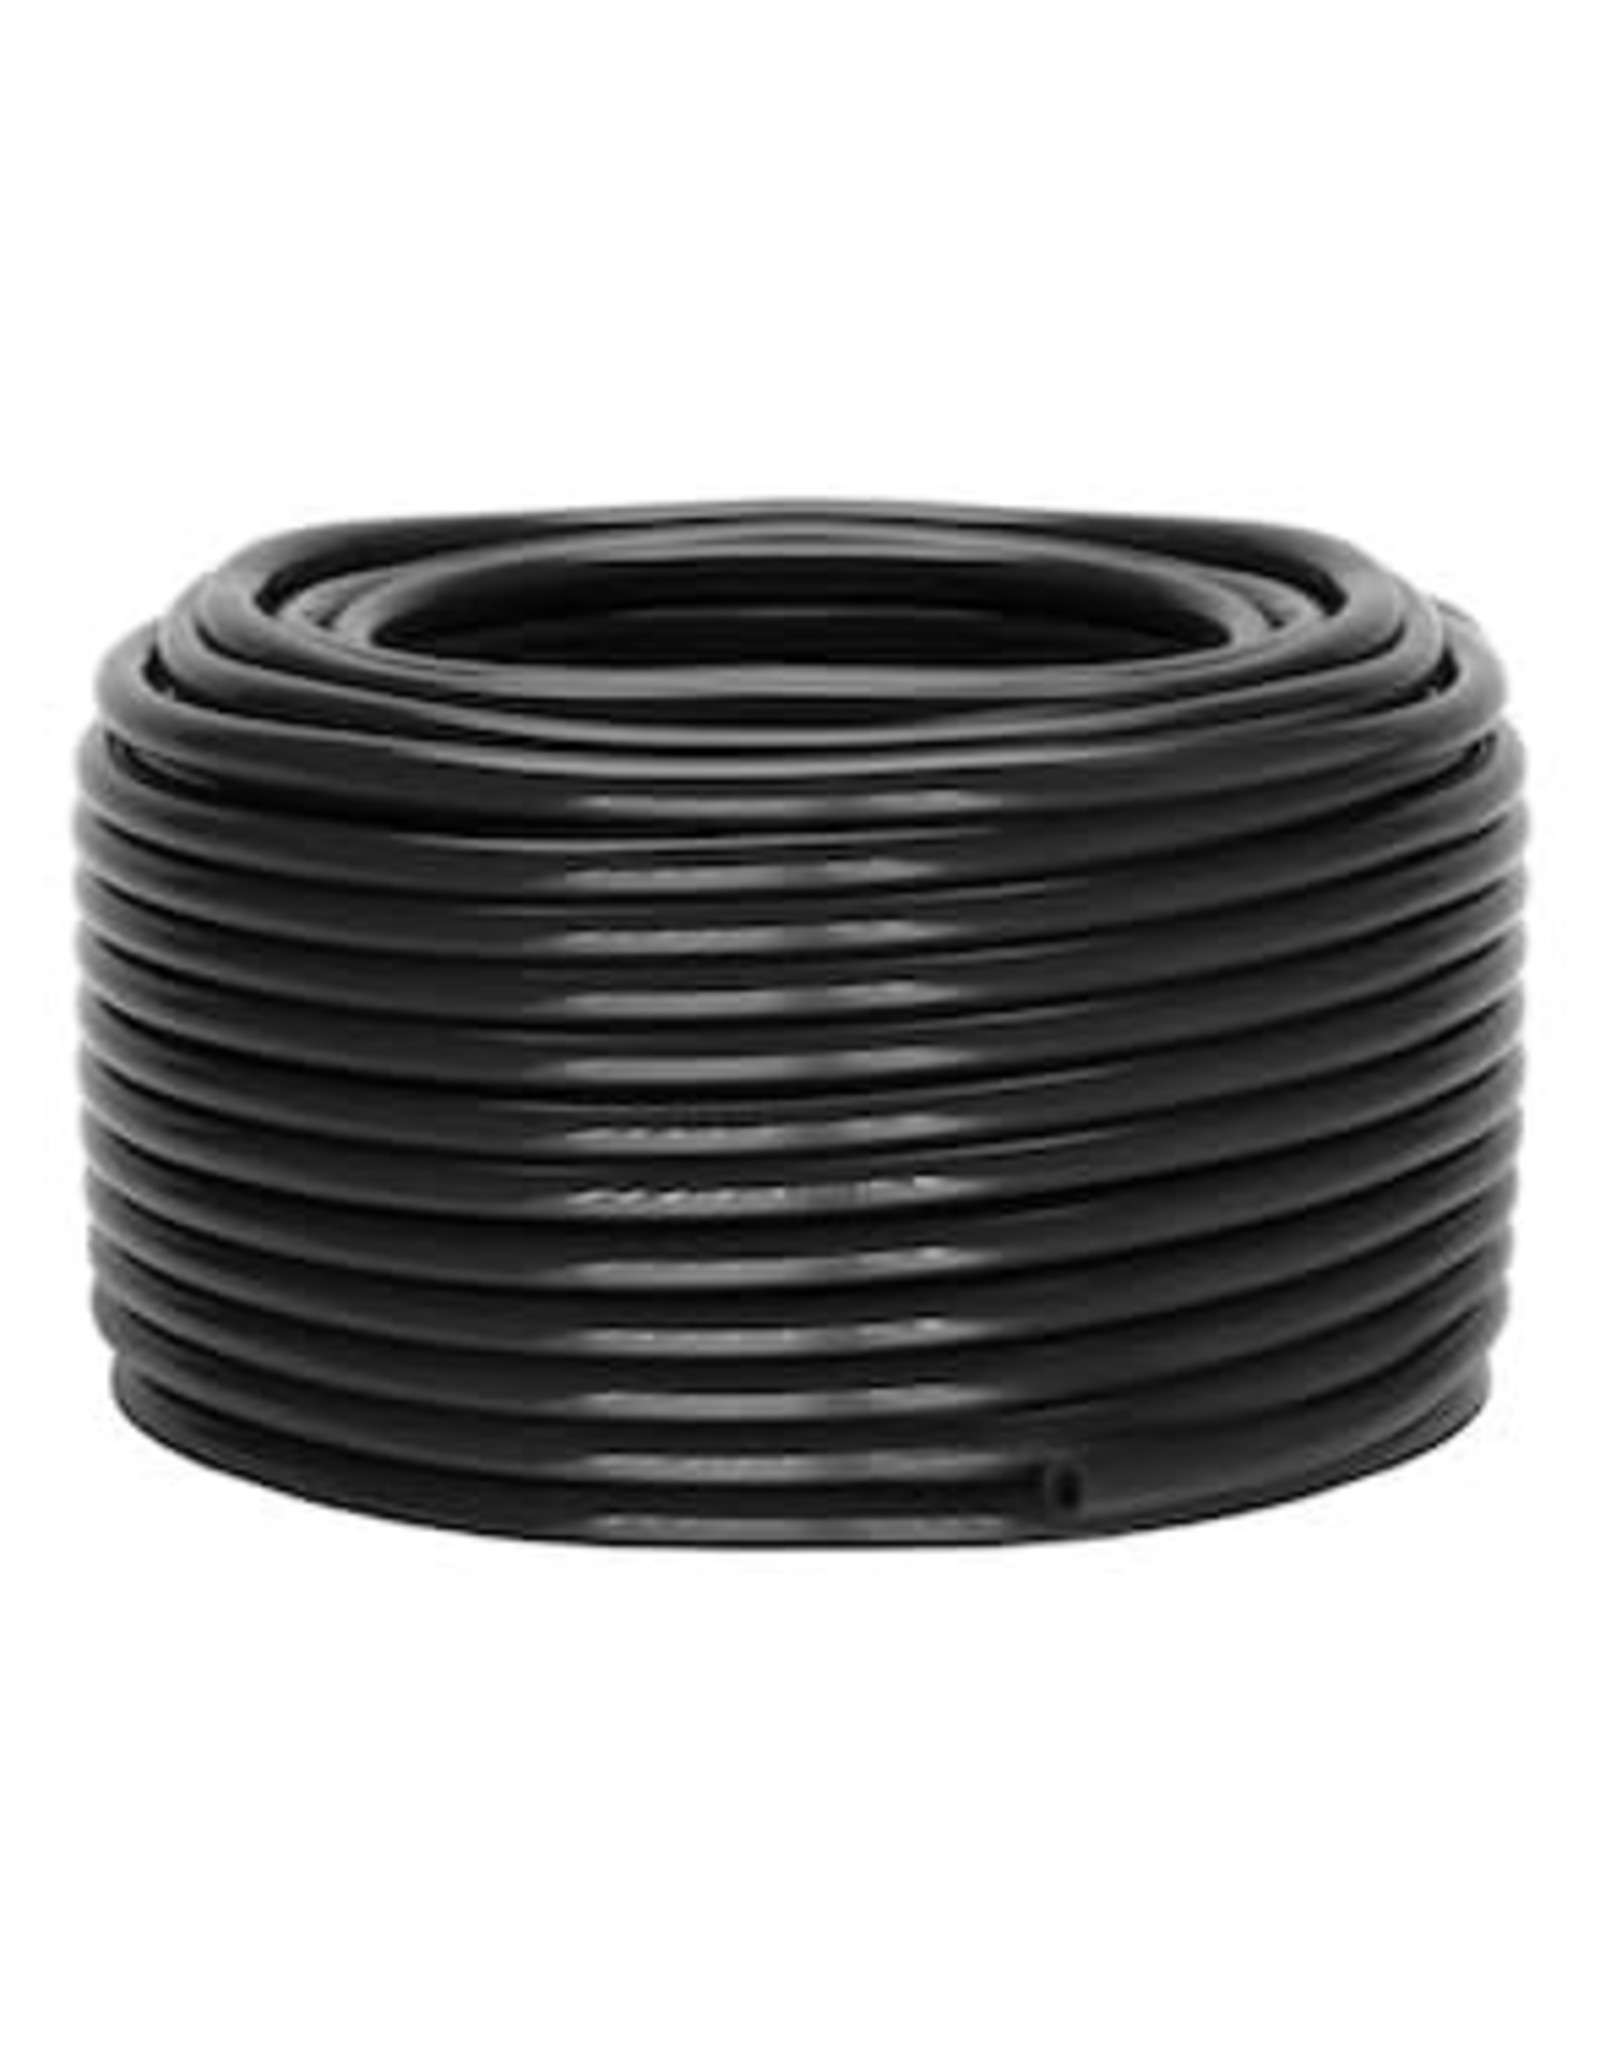 Grow1 Grow1 Black Vinyl Tubing I.D. 3/16'' (Sold By The Foot)